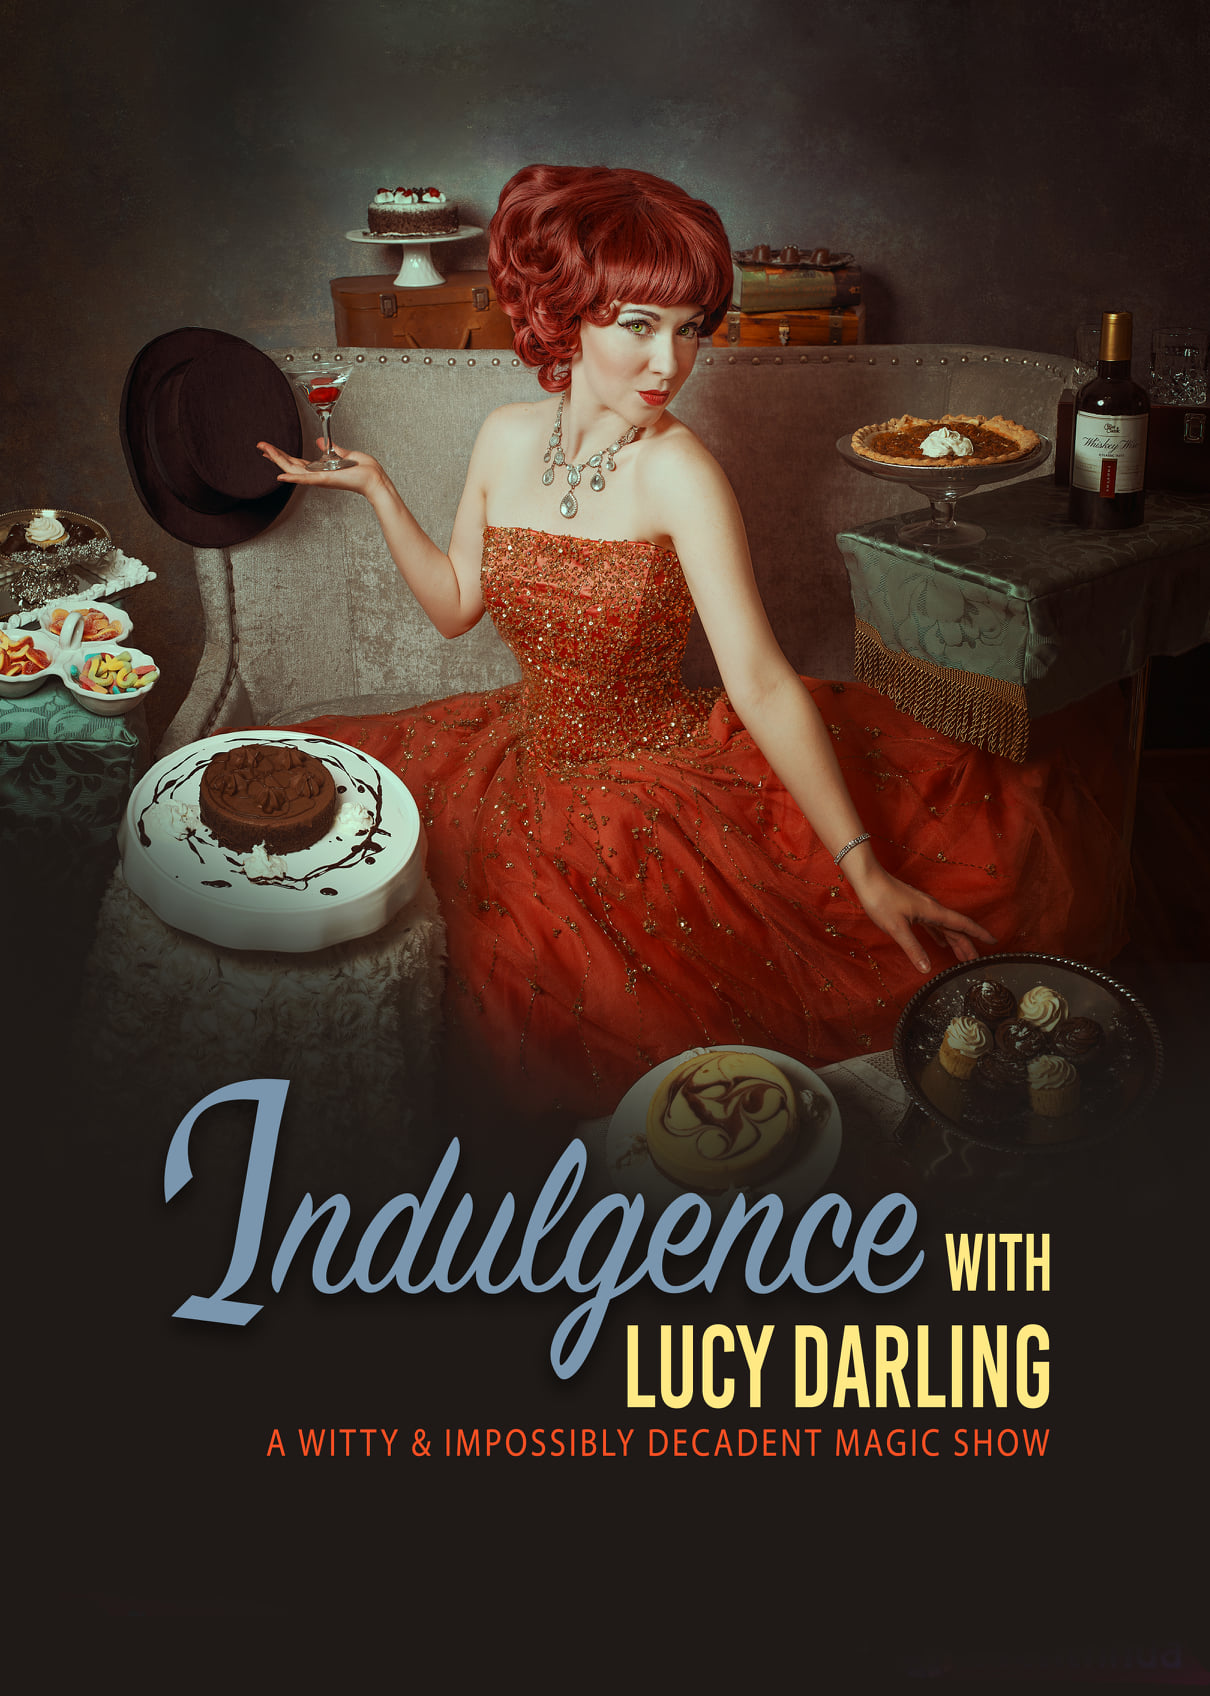 Announcing the Three Month Chicago Run of Indulgence with Lucy Darling